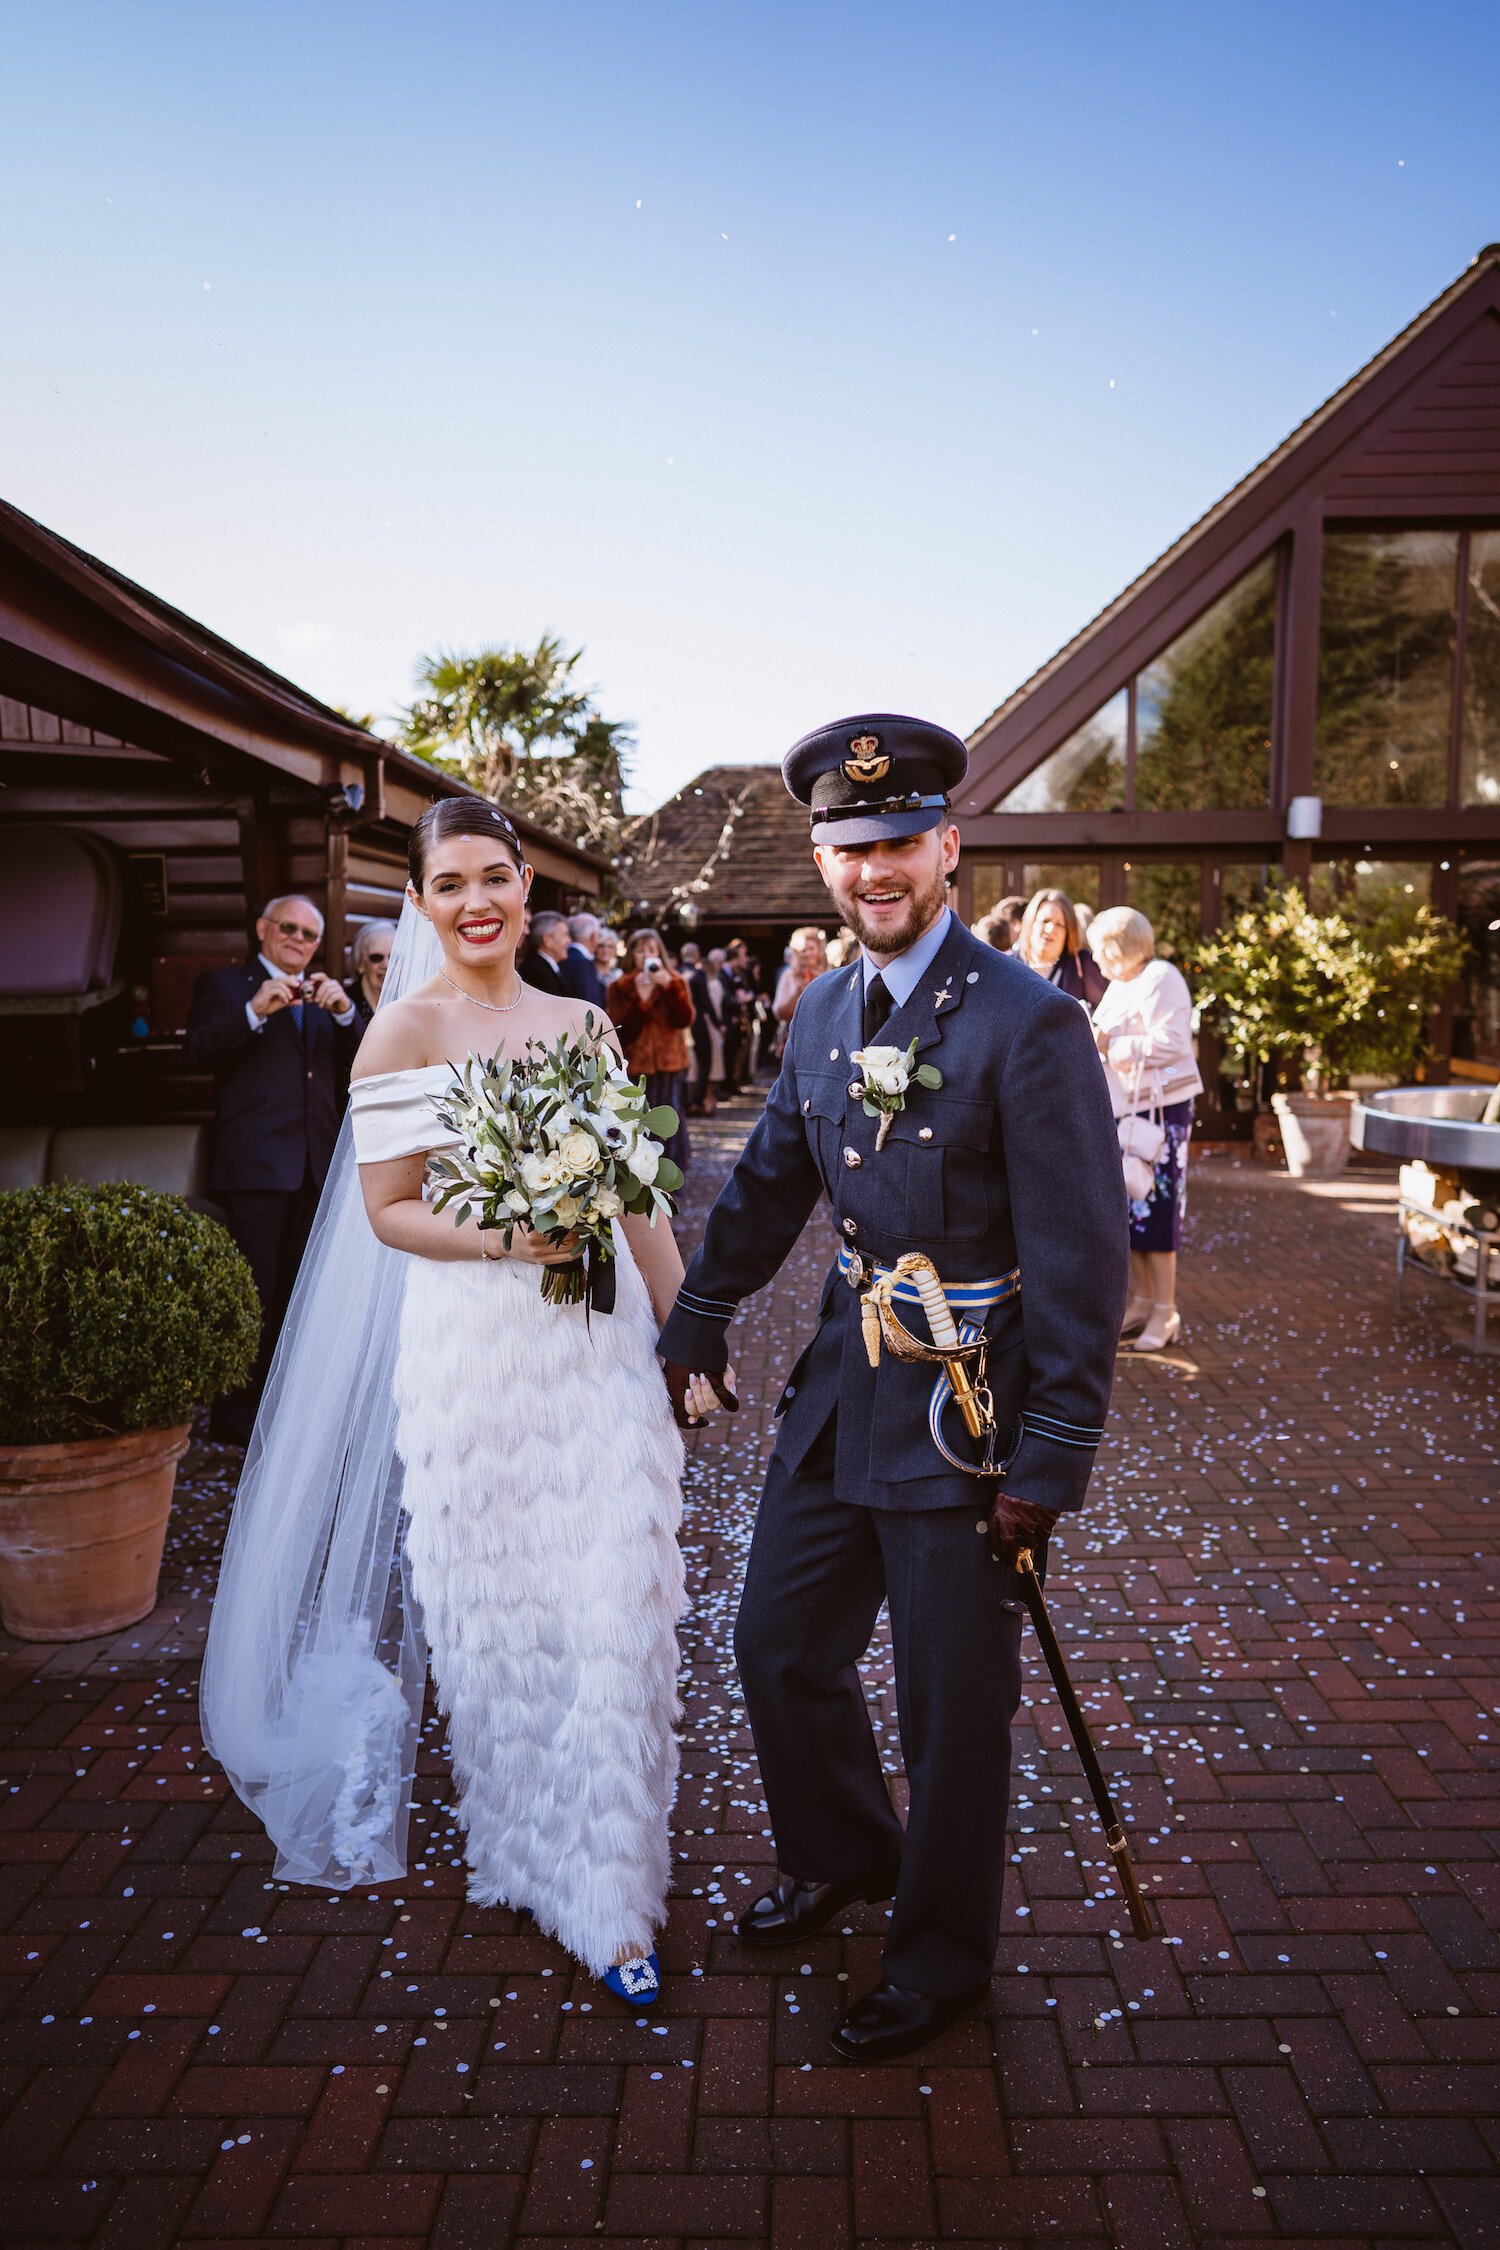 Beautiful bride Emma wears the Ivy skirt and Daffodil top by Halfpenny London for her wedding day